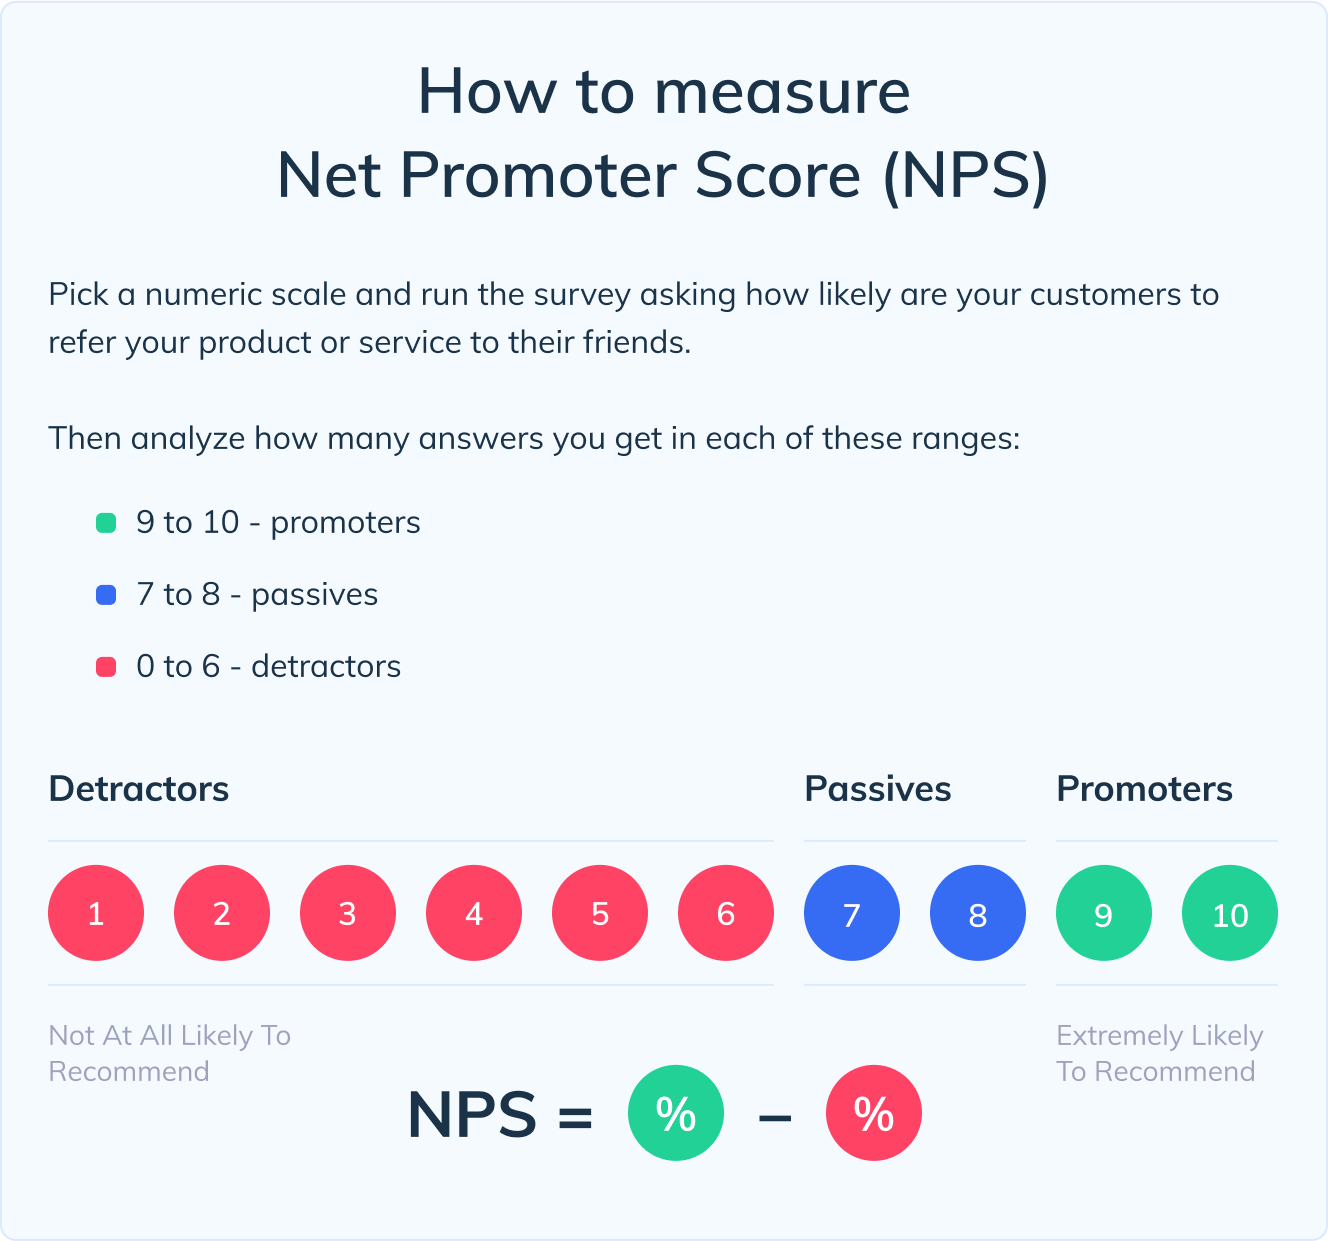 How to measure NPS